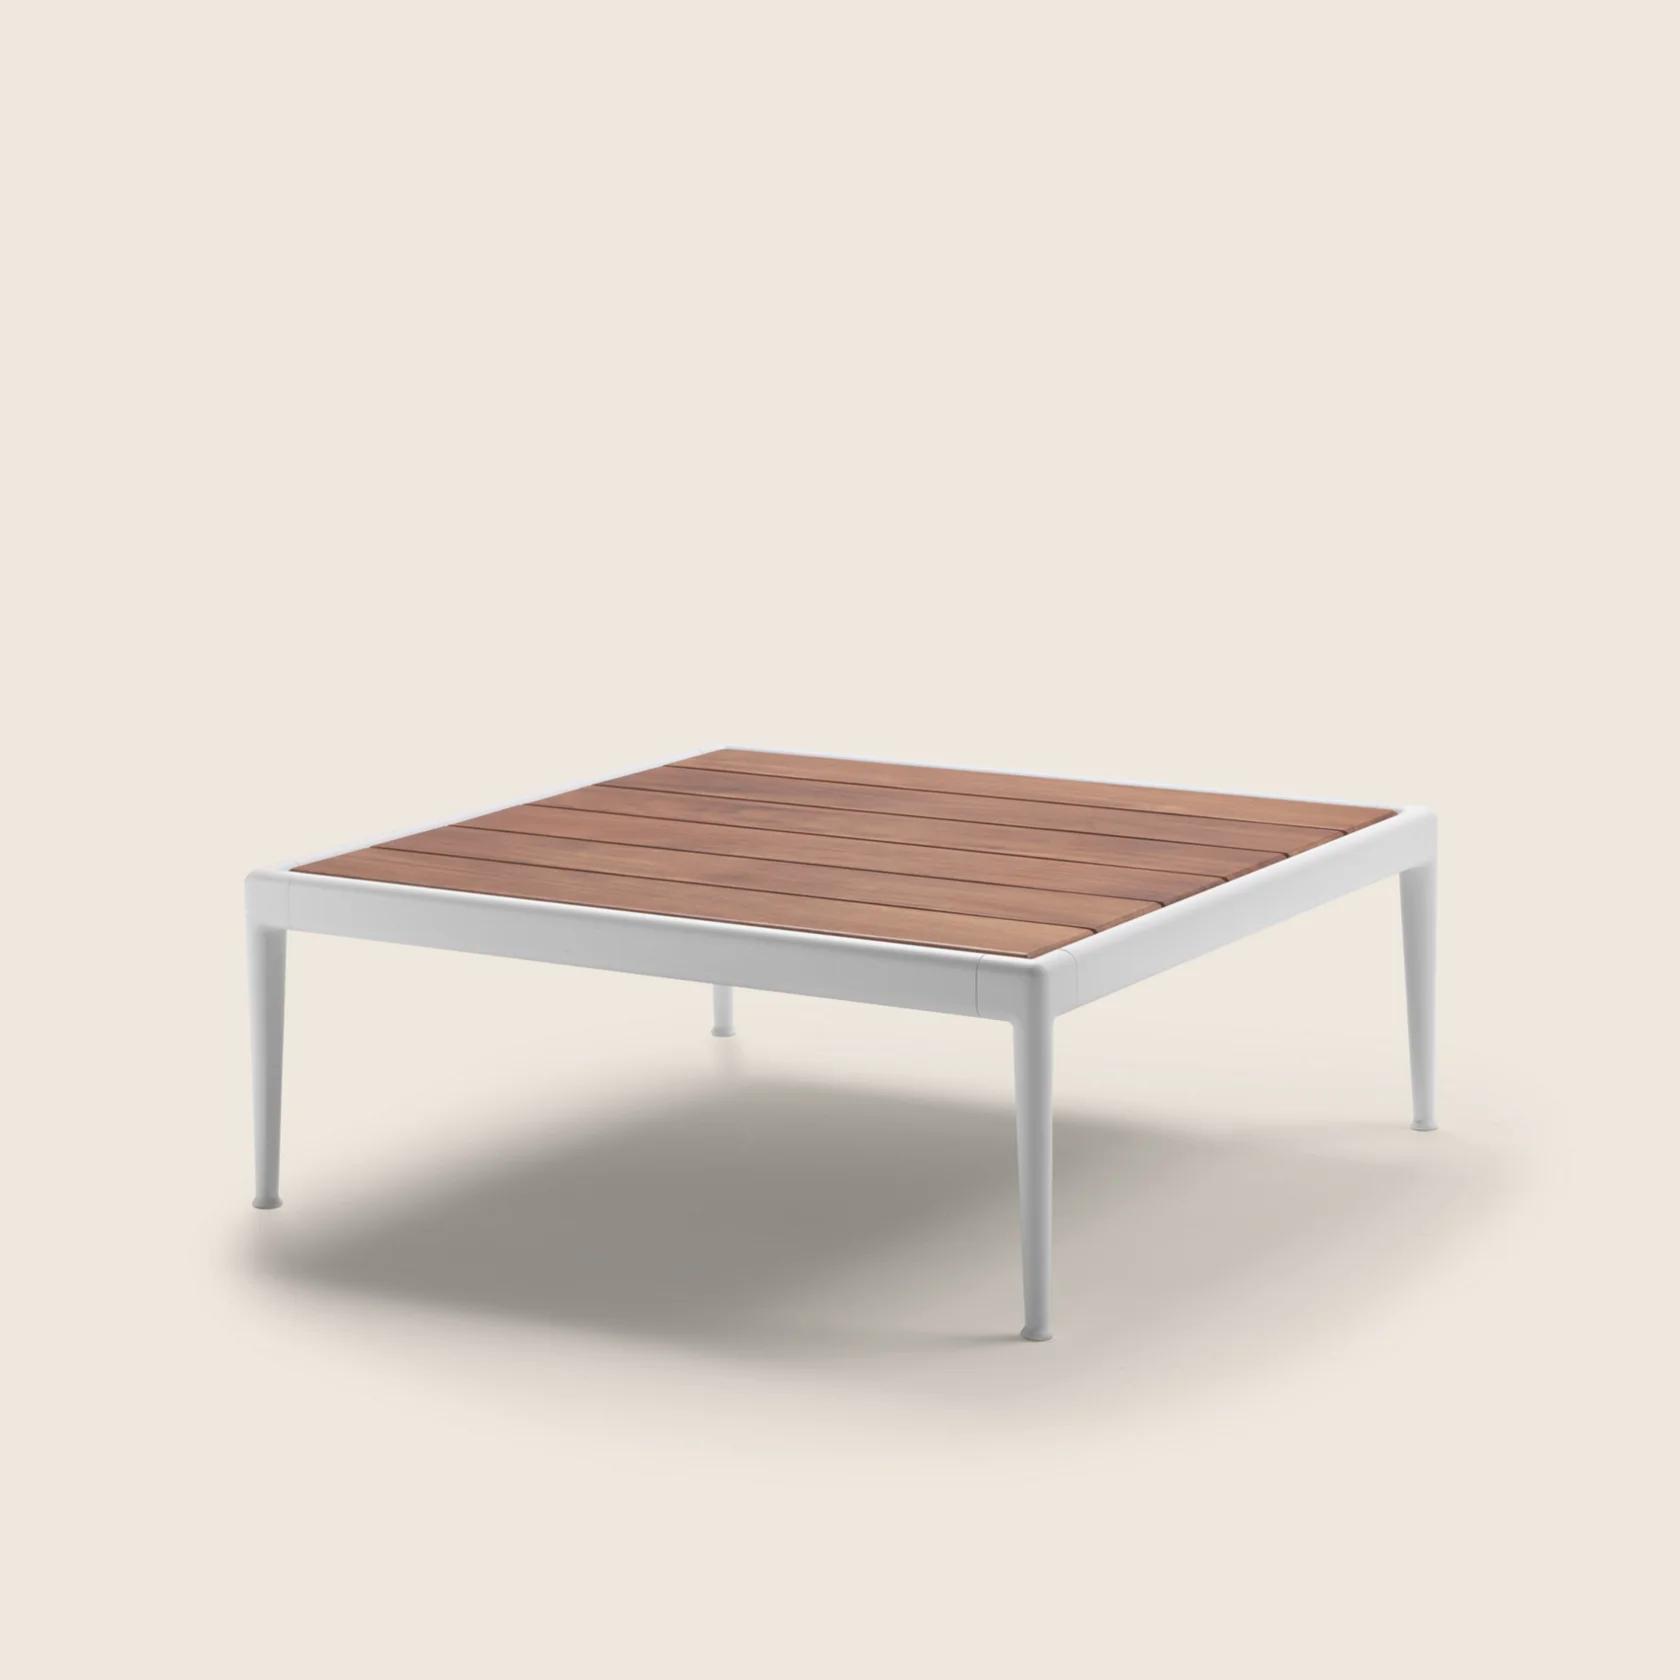 0283H1_PICO OUTDOOR_COFFEETABLE_09.png